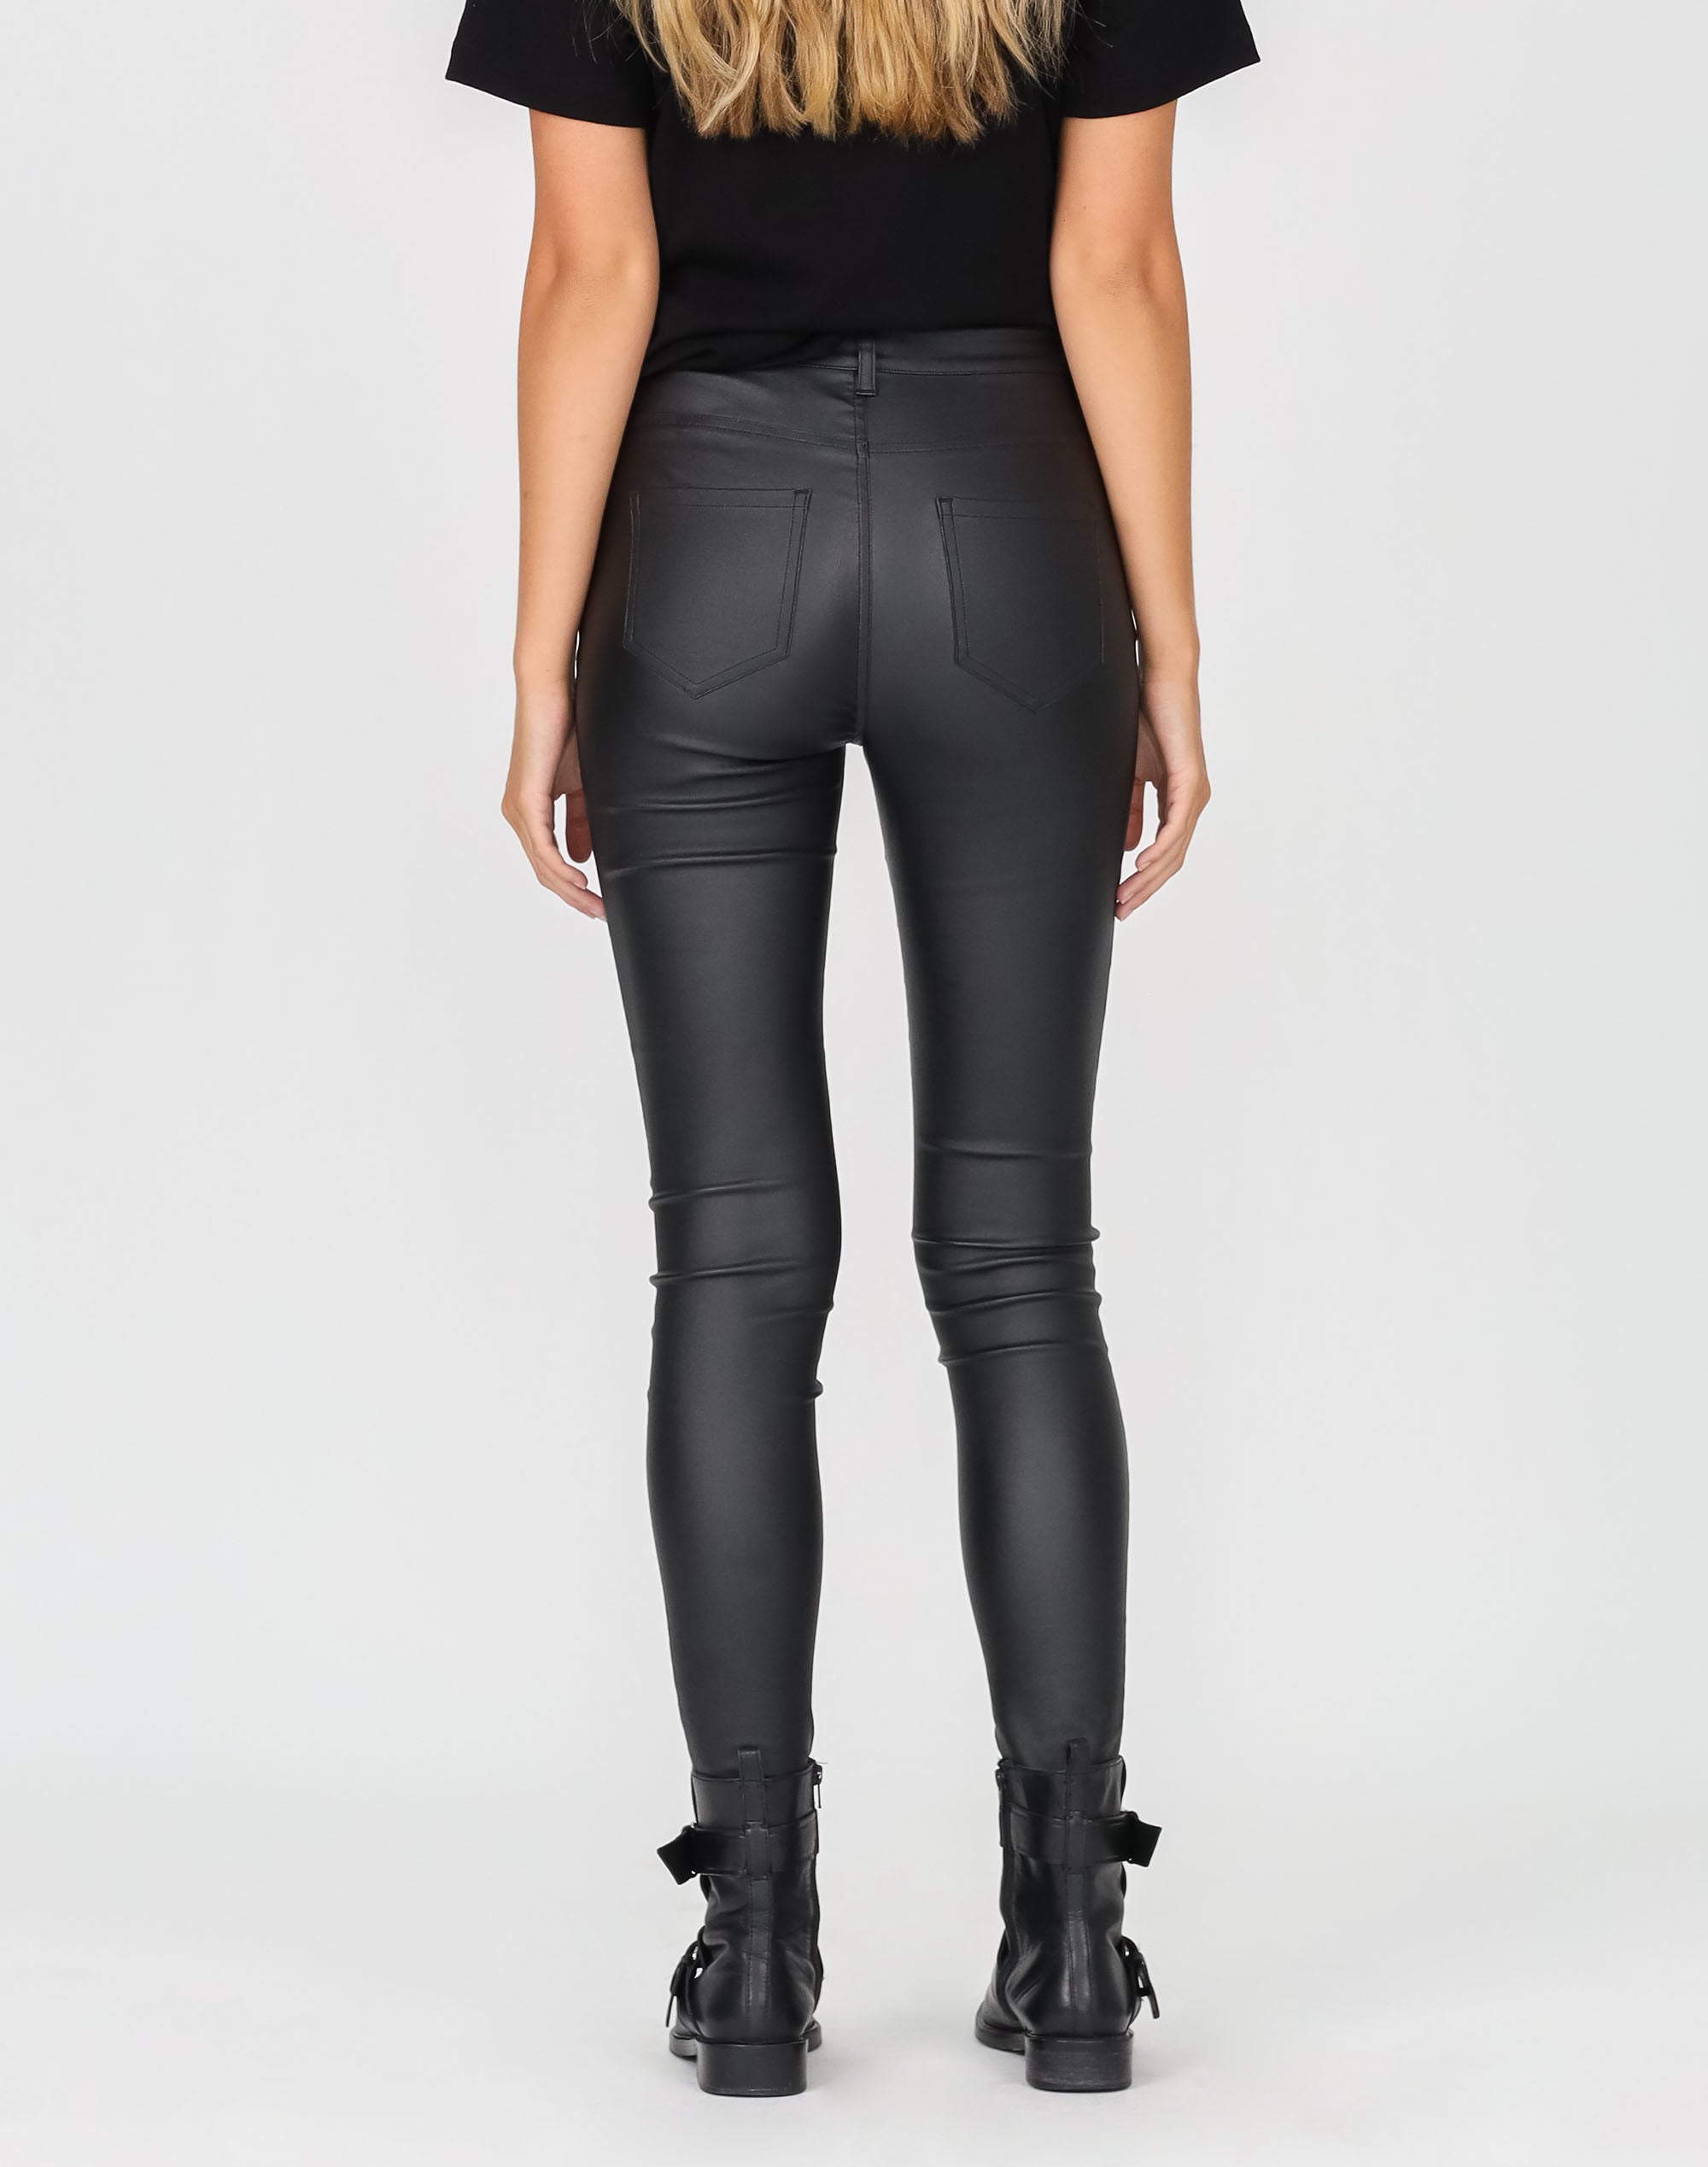 High Waist Faux Leather Pants Brown - Southern Fashion Boutique Bliss